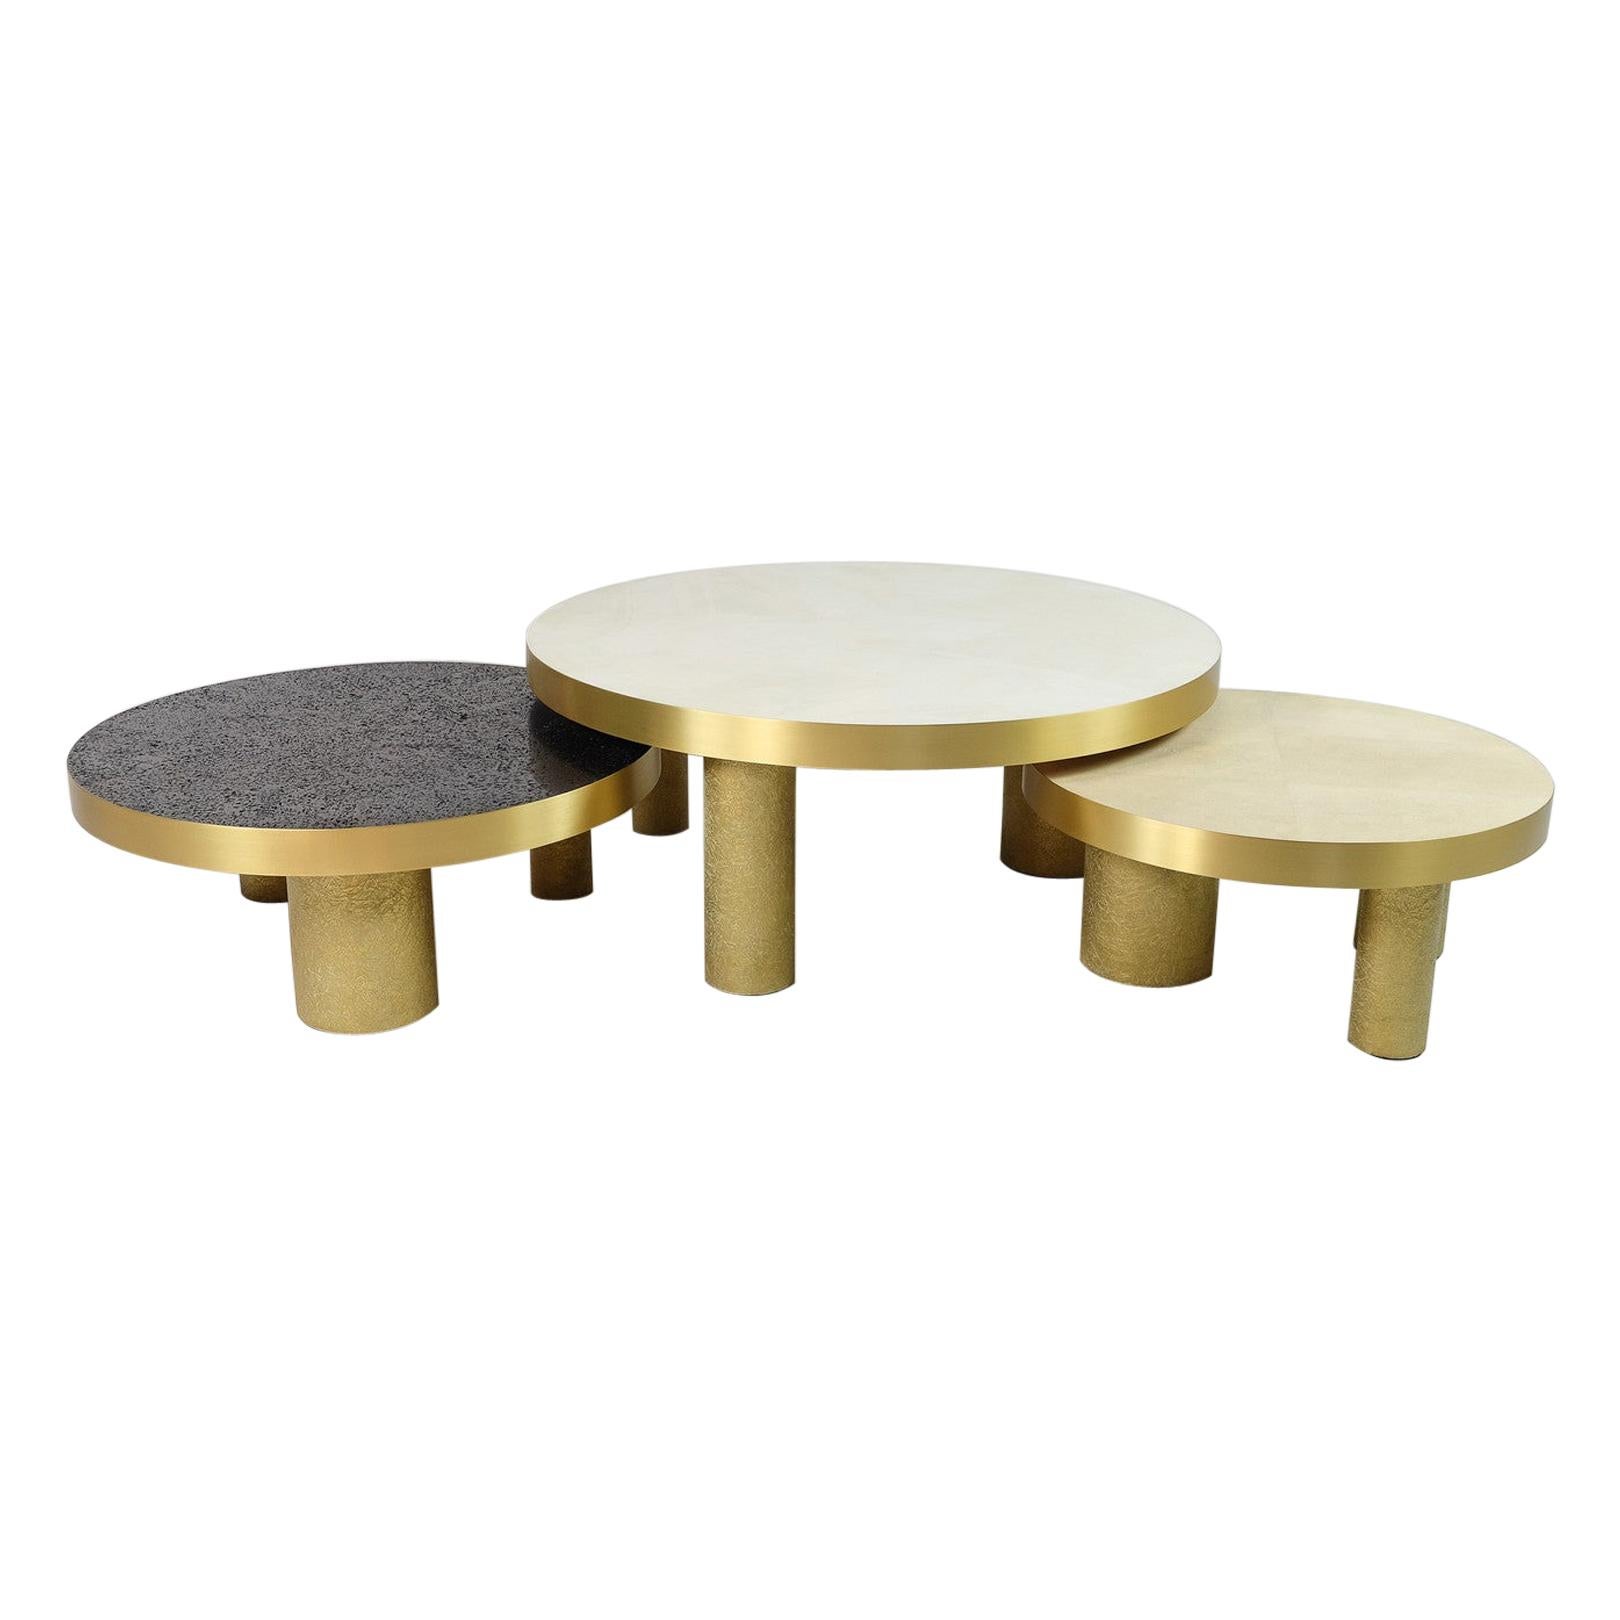 Set of 3 Round Coffee Tables in Rock Crystal, Shagreen and Stone by Ginger Brown In New Condition For Sale In Bourguebus, FR